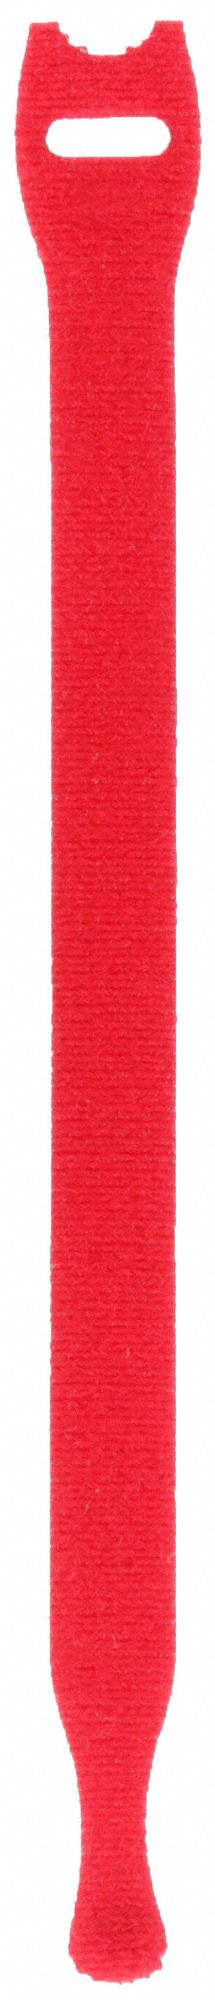 VELCRO BRAND Hook-and-Loop Cable Tie: 8 in Lg, 2.00 in, 0.75 in Wd,  Nylon/Polypropylene, Red, 900 PK